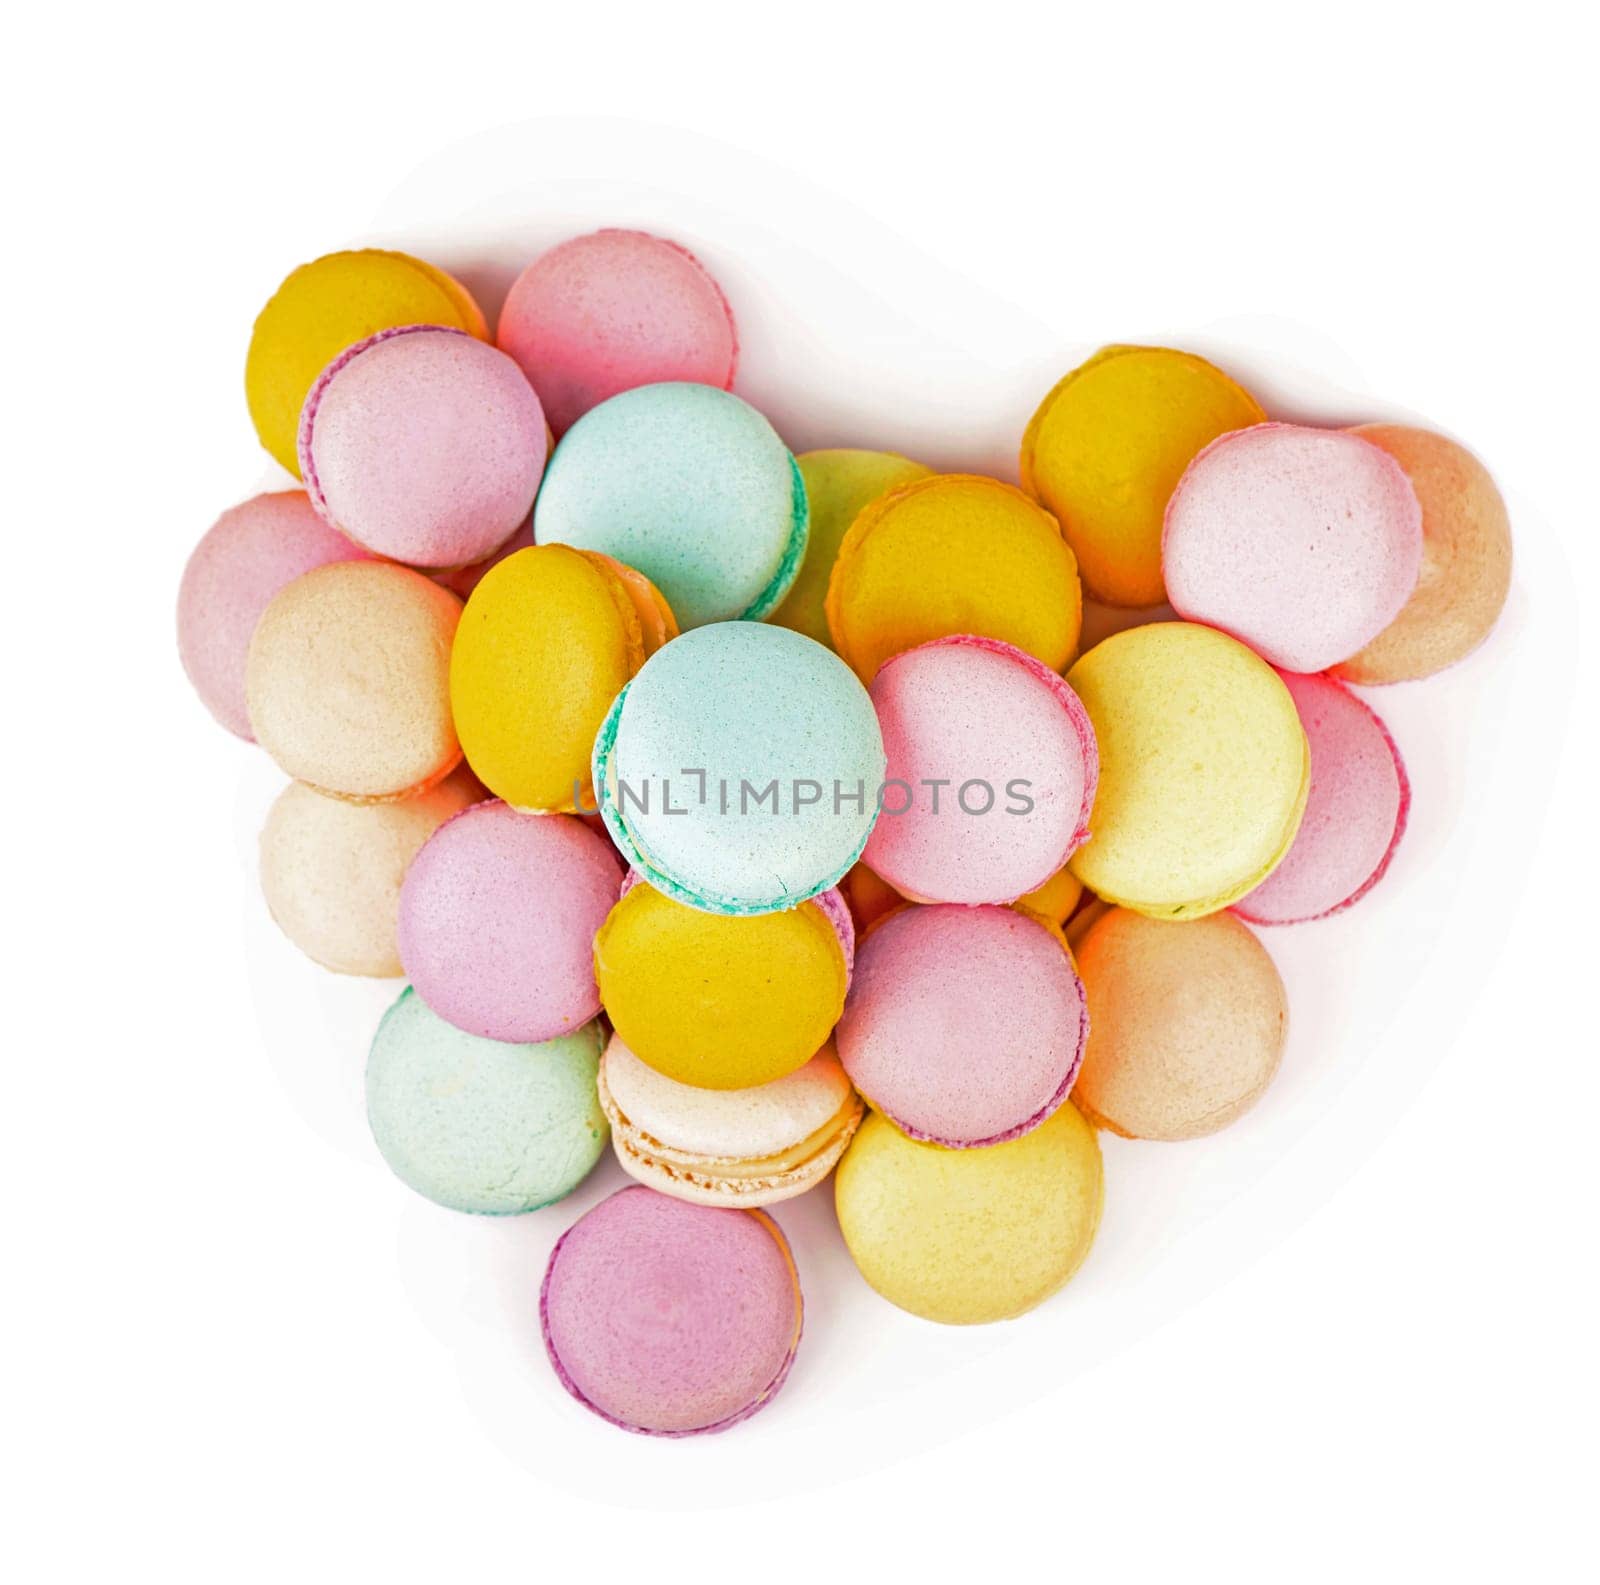 Delicious three multicolored macaroon on a white background by aprilphoto